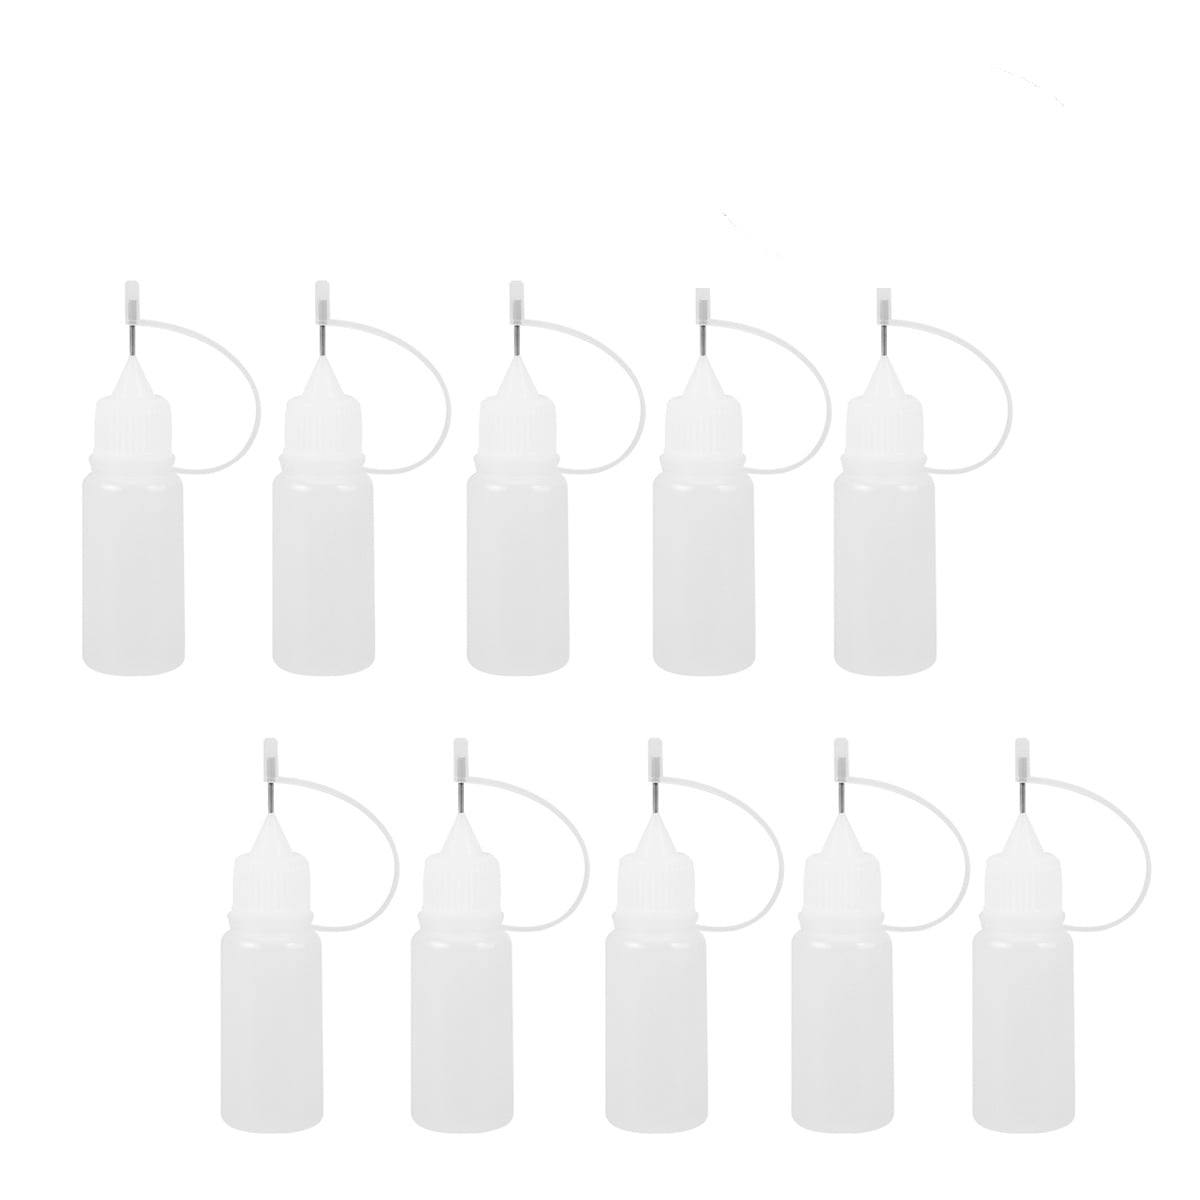  Quilled Creations Precision Tip Glue Applicator Bottle - Empty,  5oz